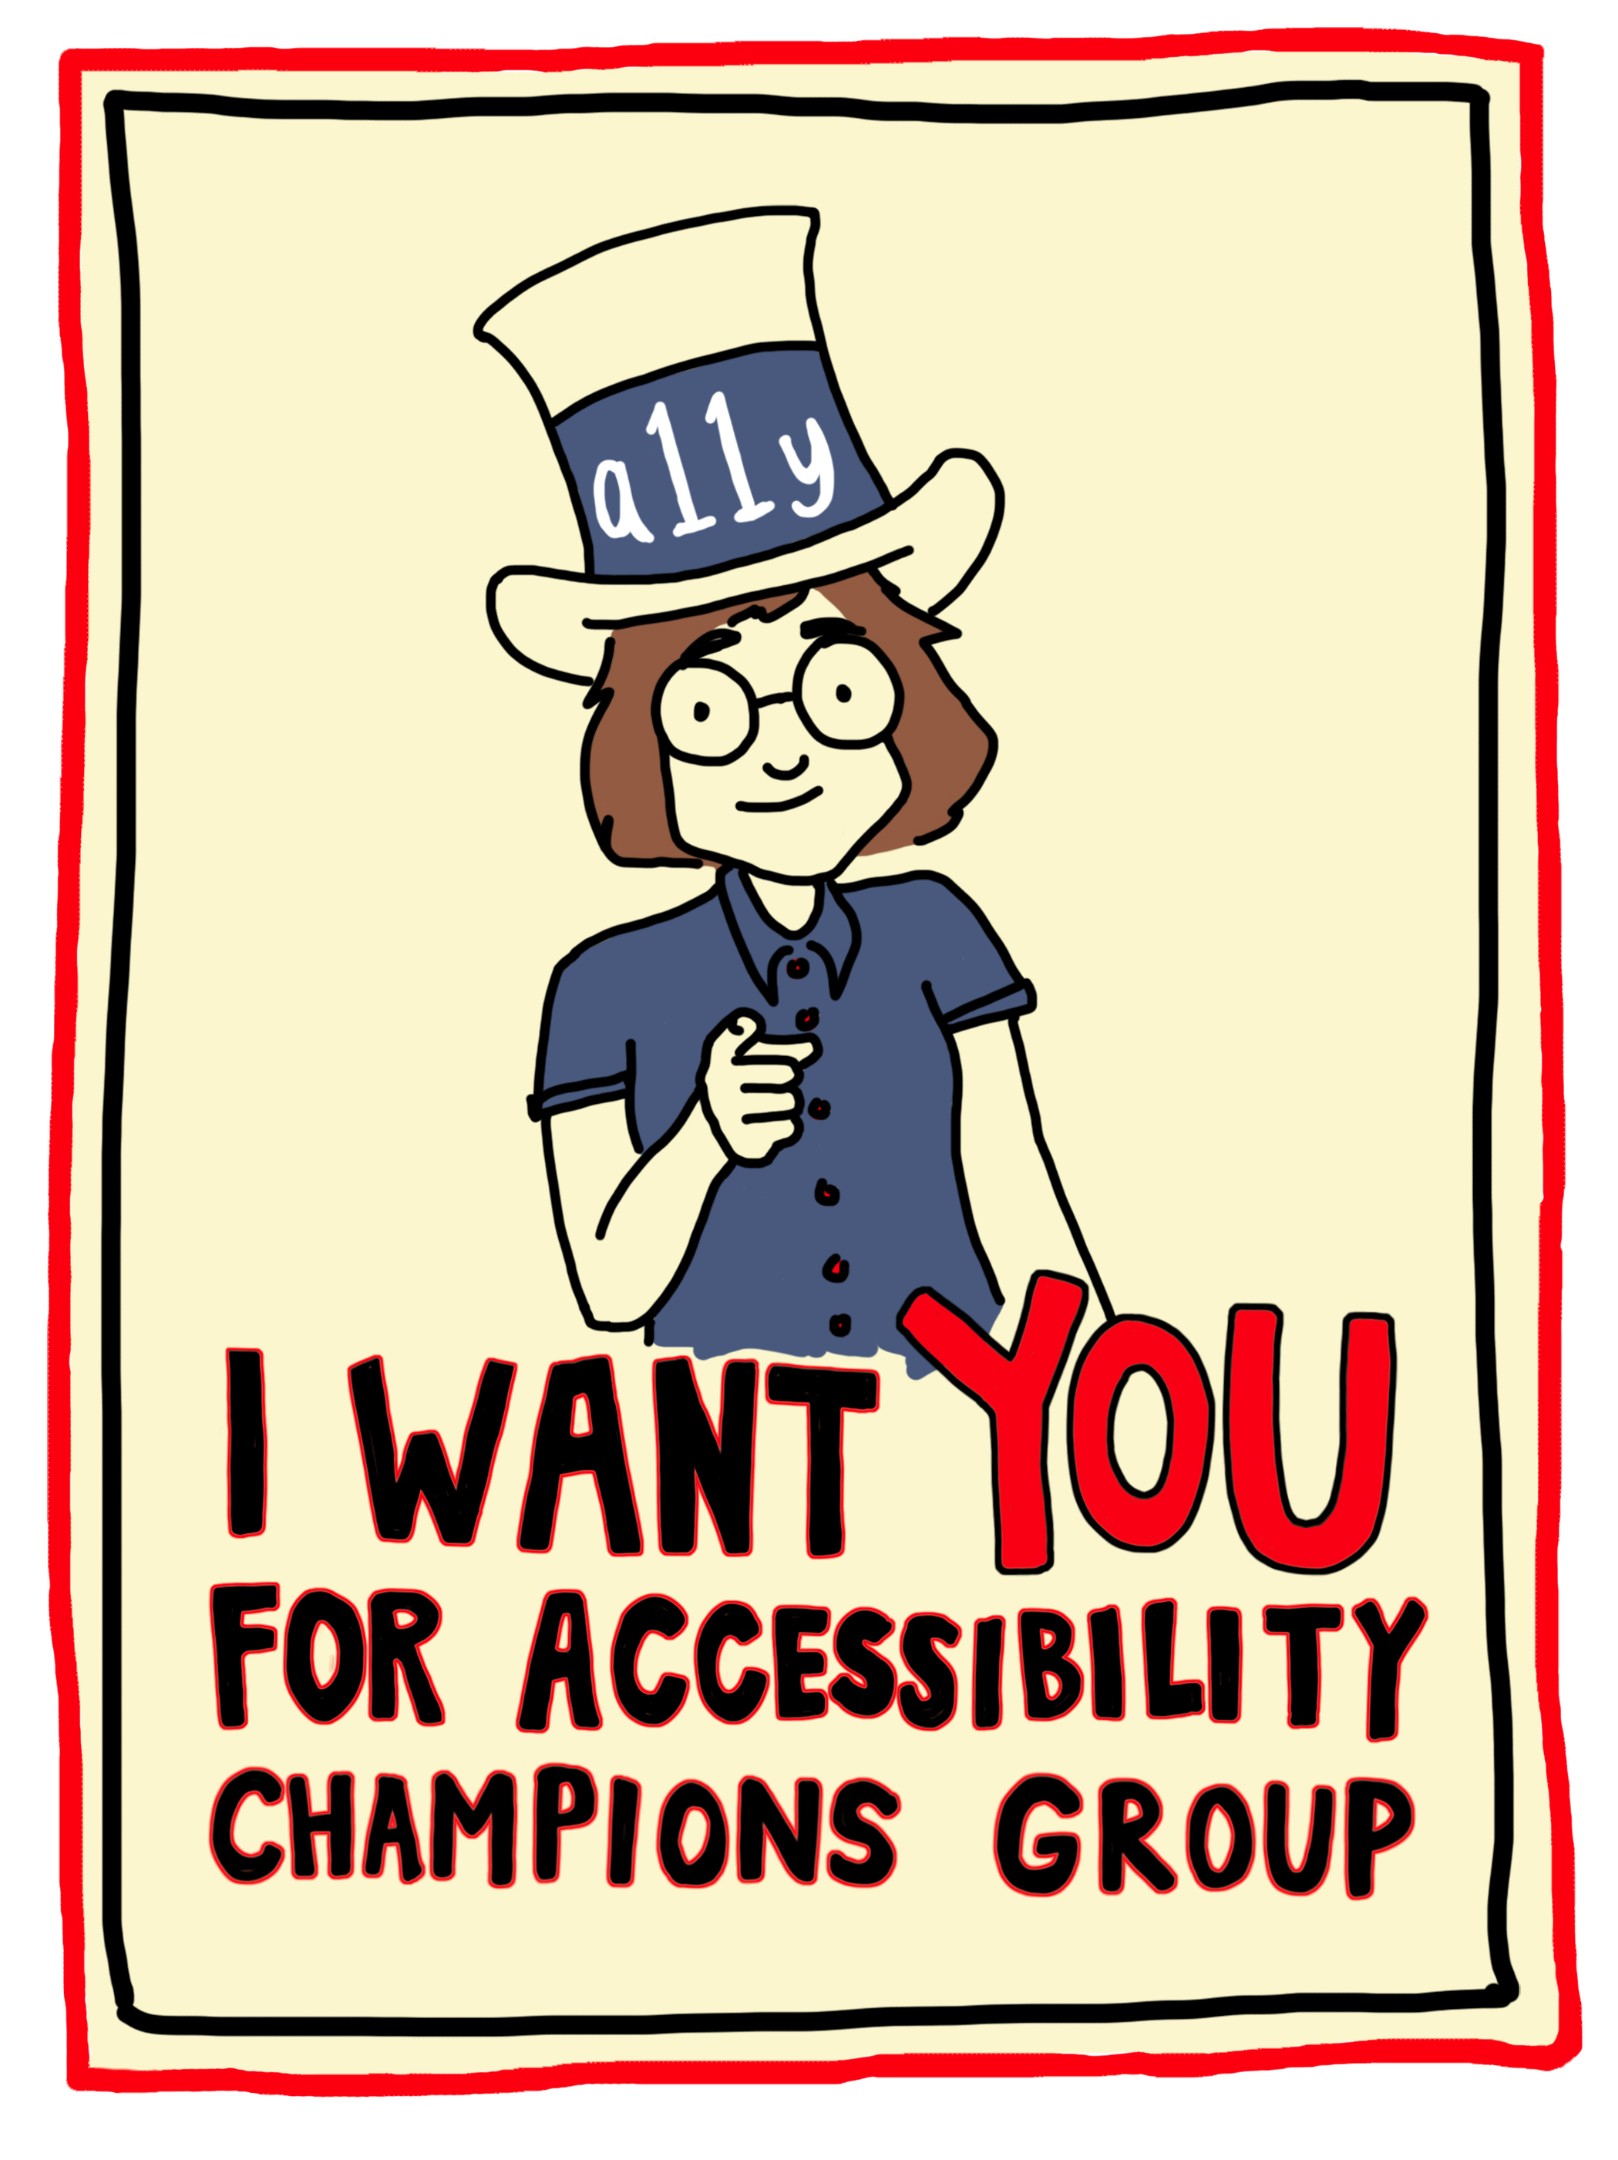 Illustrated poster mimicking the Uncle Sam “I want you” poster. The author, wearing a hat that reads “a11y” across the front, points at the viewer, above all-caps text: “I want *you* for Accessibility Champions Group.”